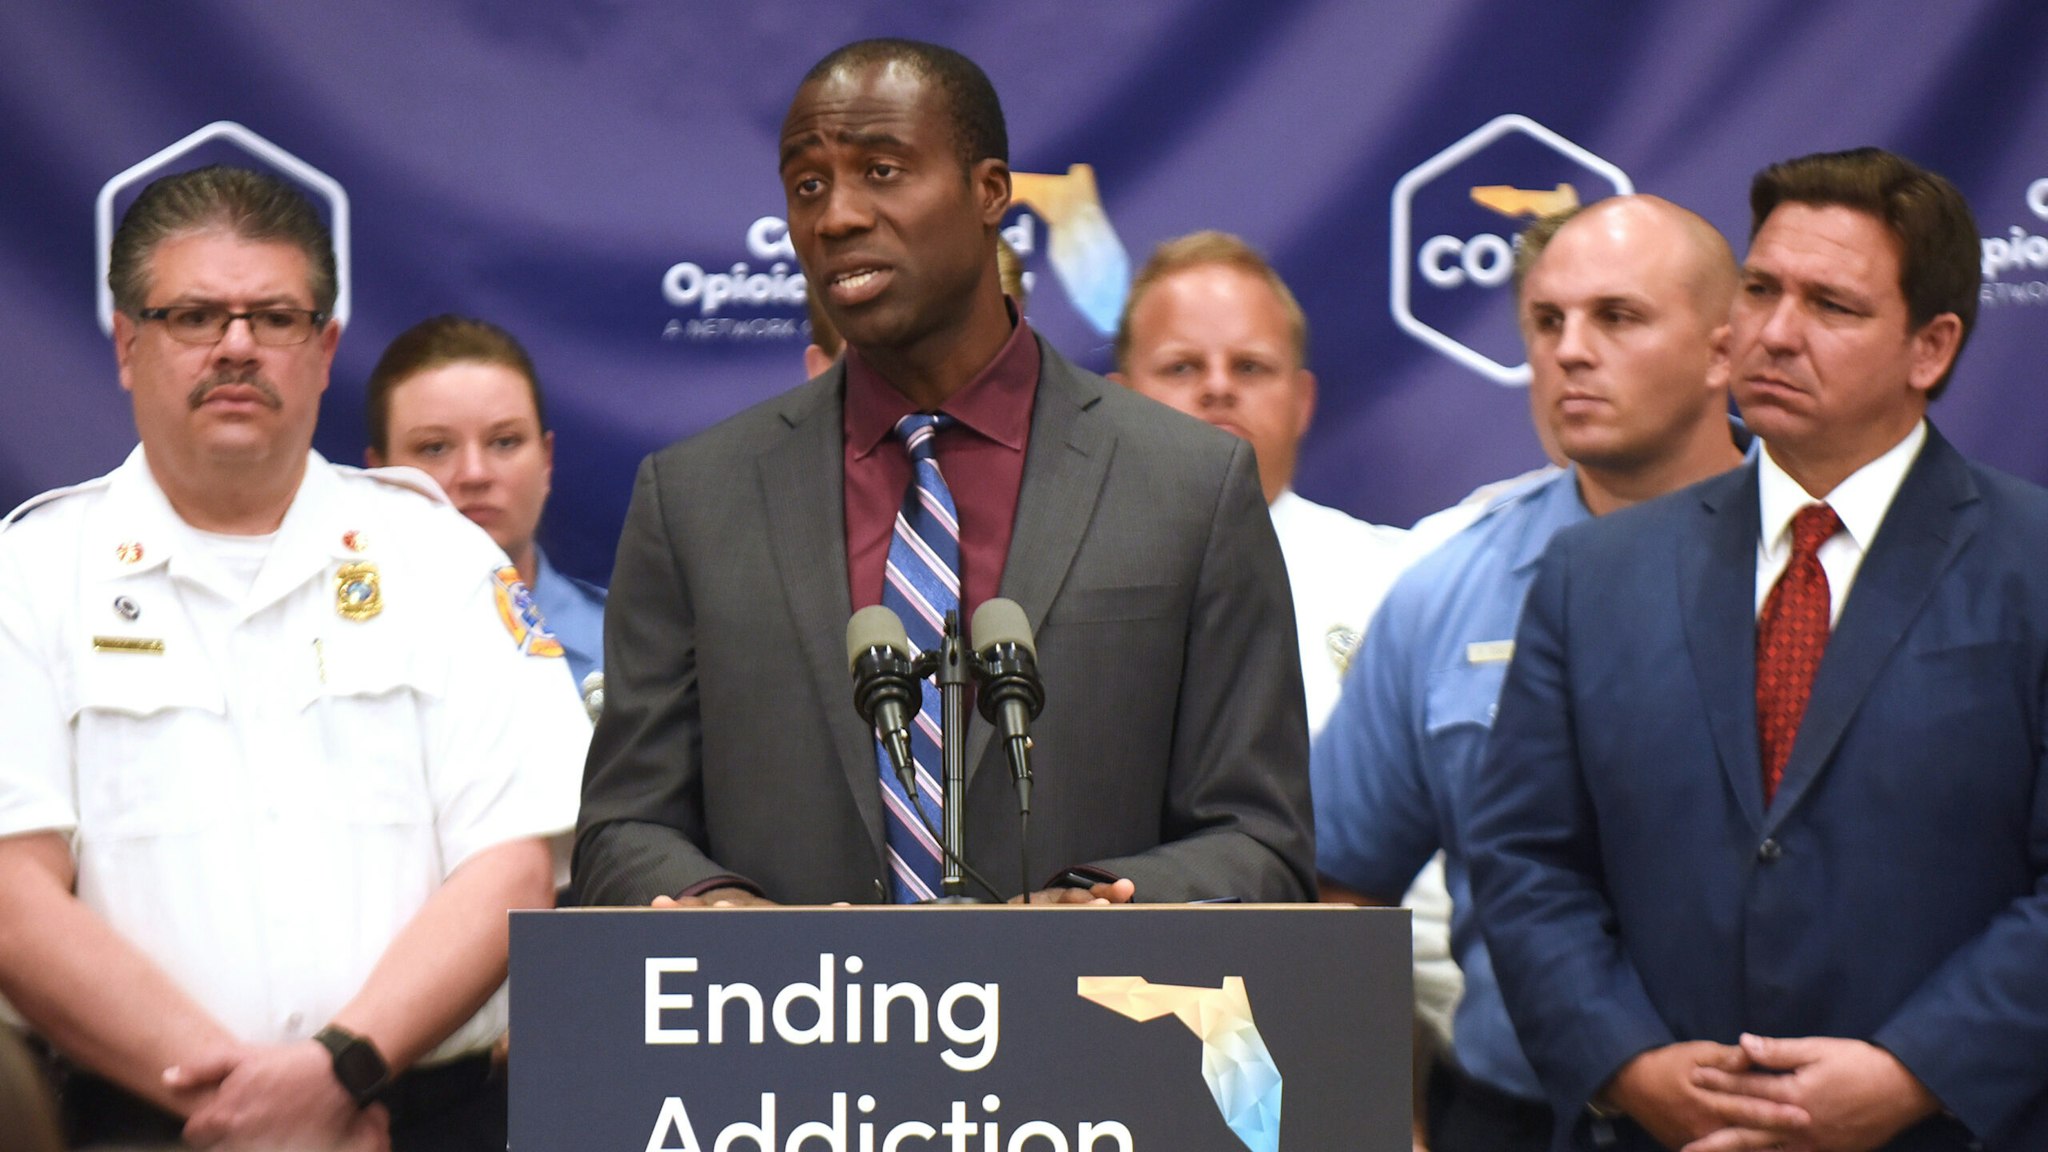 ROCKLEDGE, UNITED STATES - 2022/08/03: Florida surgeon general Joseph Ladapo speaks at a press conference where Gov. Ron DeSantis announced the expansion of a new, piloted substance abuse and recovery network to disrupt the opioid epidemic, at the Space Coast Health Foundation in Rockledge, Florida. The Coordinated Opioid Recovery (CORE) network of addiction care was piloted in Palm Beach County and will be expanding in up to twelve counties to assist Floridians battling with addiction.